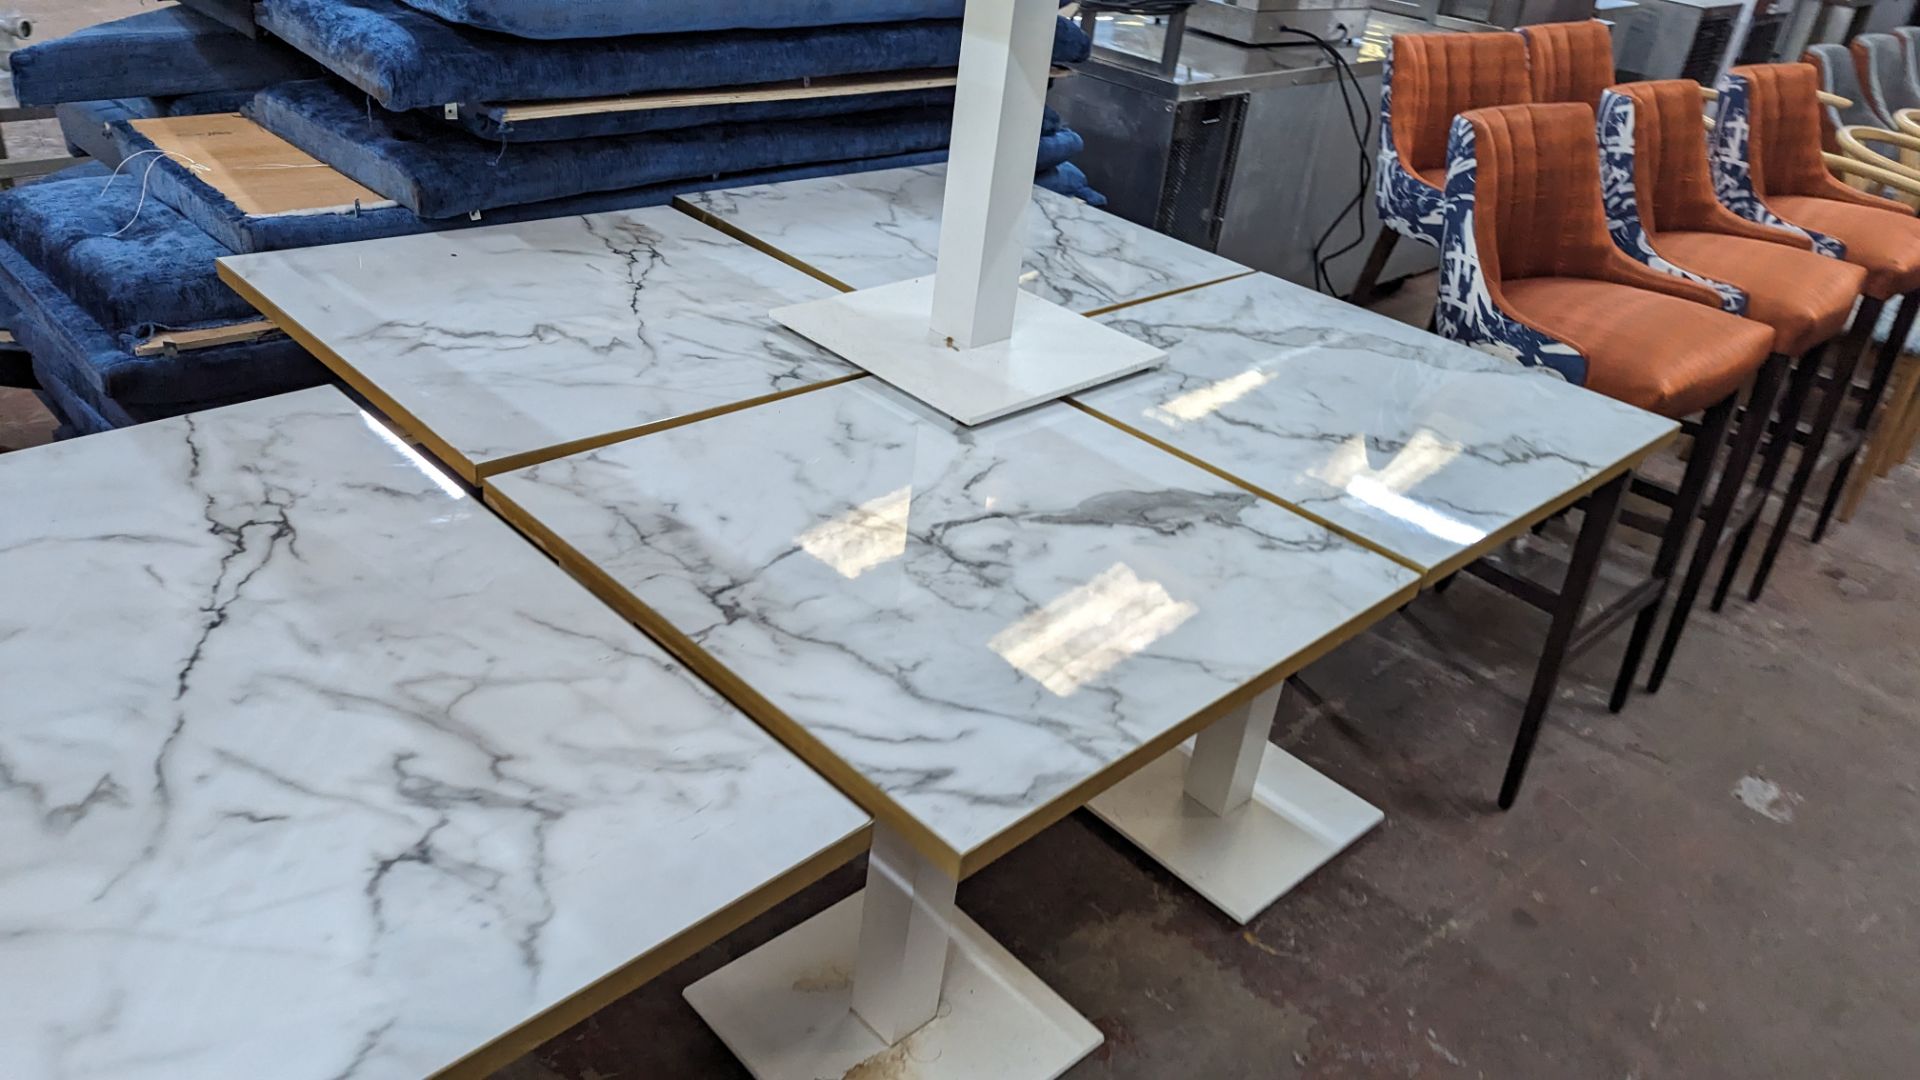 10 off matching dining tables in 3 different sizes with marble effect tops. 2 of the tables are ret - Image 17 of 19